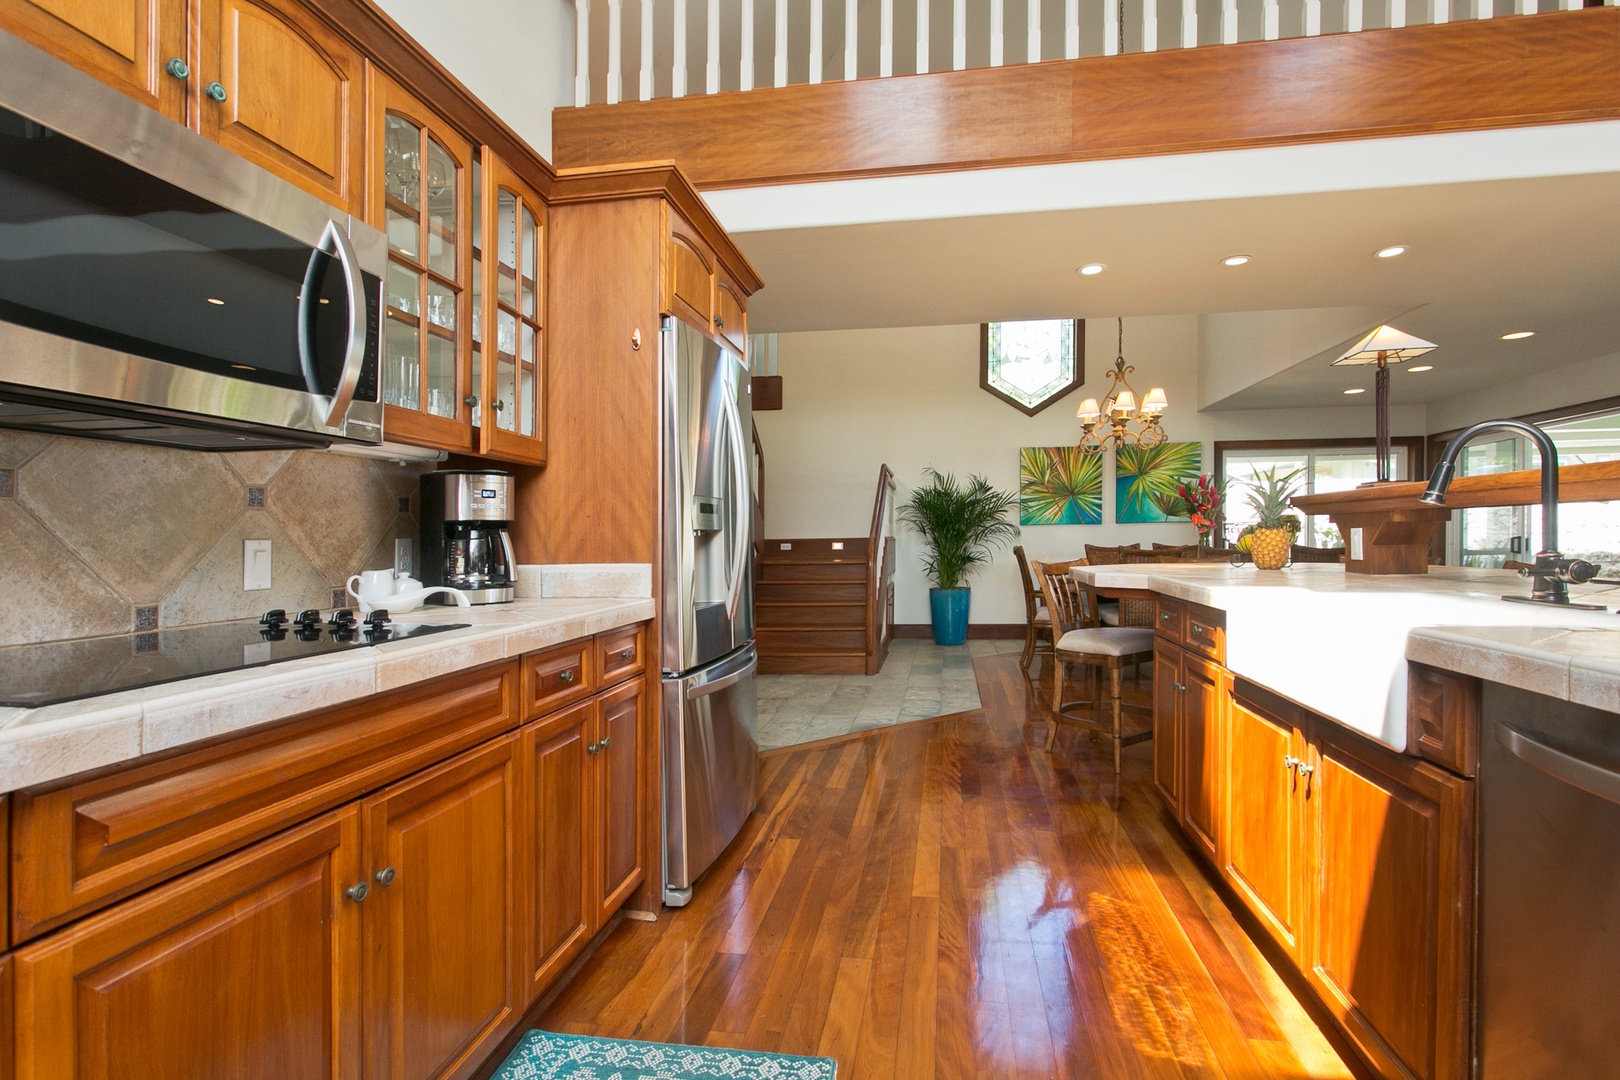 Kailua Vacation Rentals, Hale Melia* - Fully stocked kitchen with top tier appliances.